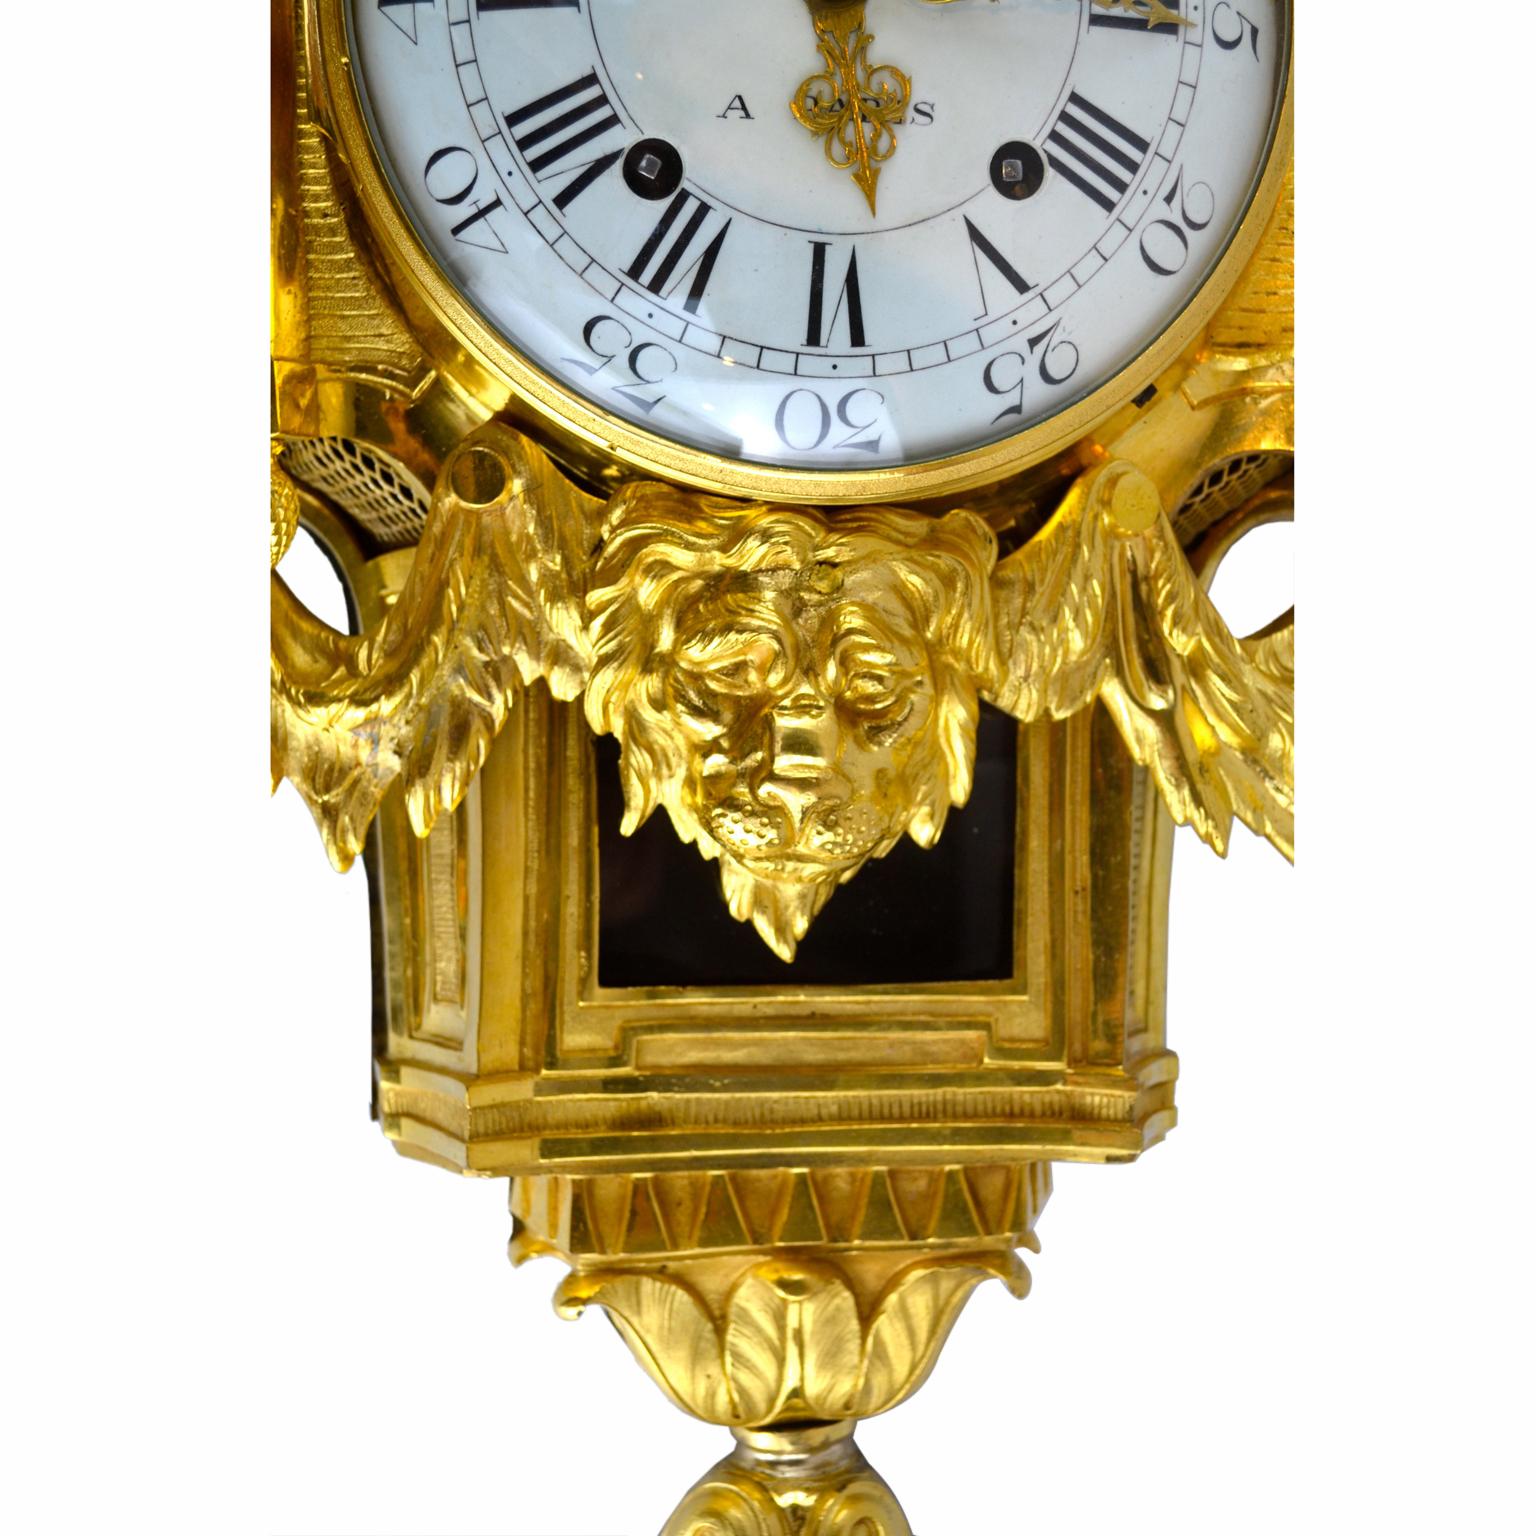 A period Louis XVI Cartel clock in original fire gilded bronze; the large white enamel dial with Roman and Arabic numerals and is signed Gilles Laine, who was an important 18th century French clockmaker. The dial is surmounted with a draped